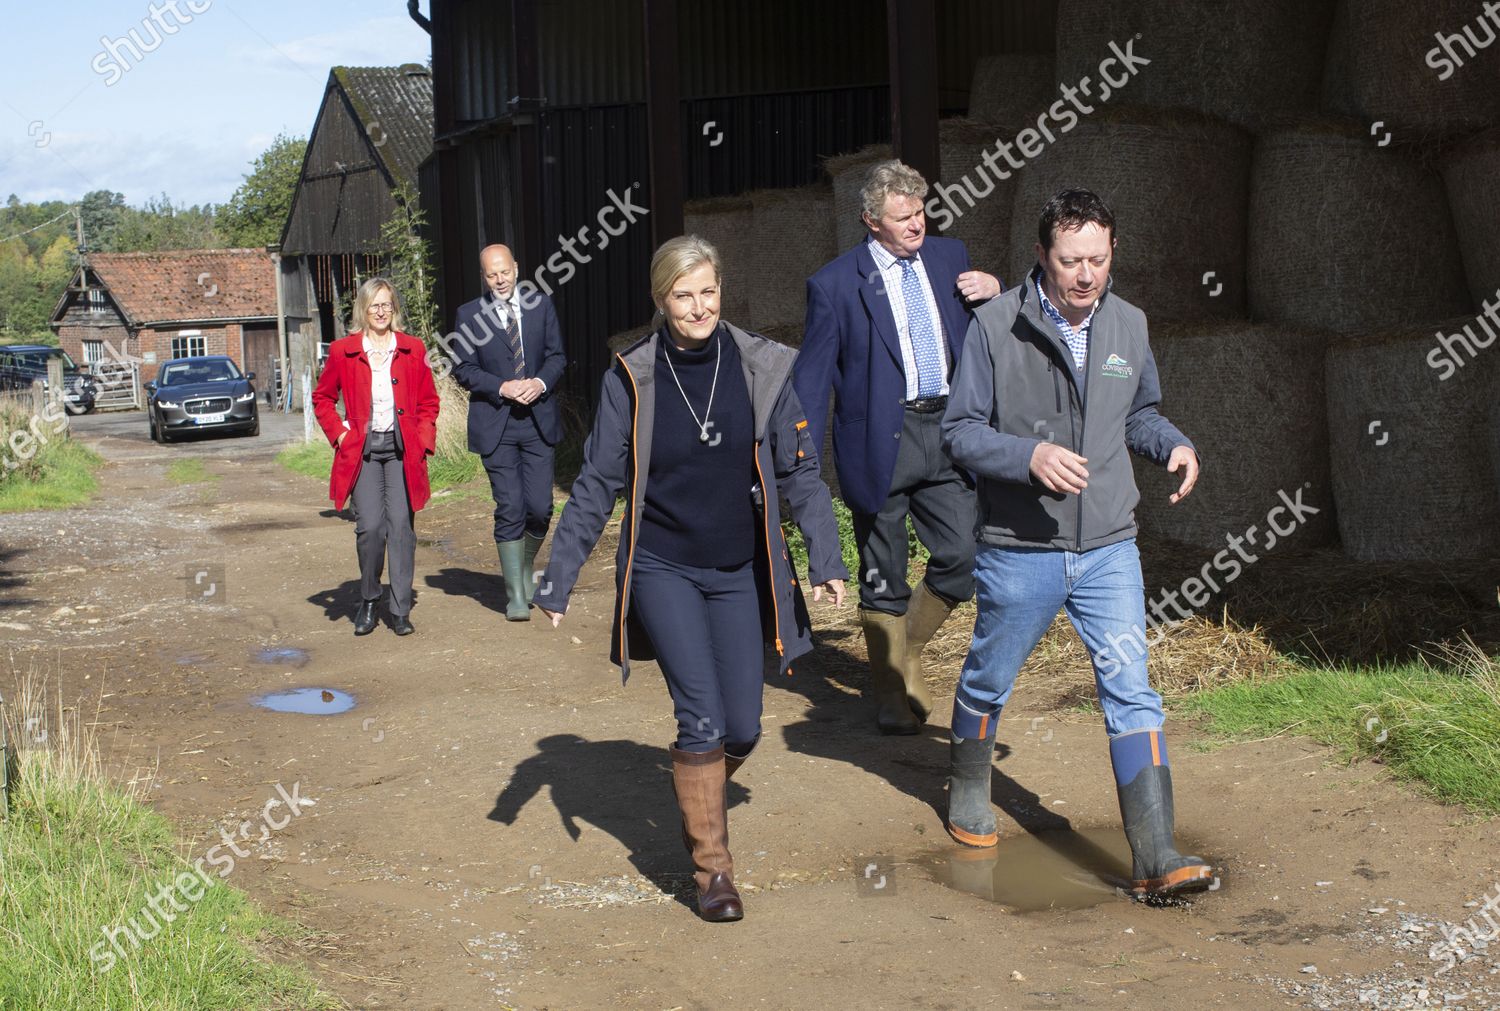 sophie-countess-of-wessex-visit-to-coverwood-farm-surrey-uk-shutterstock-editorial-10787745e.jpg